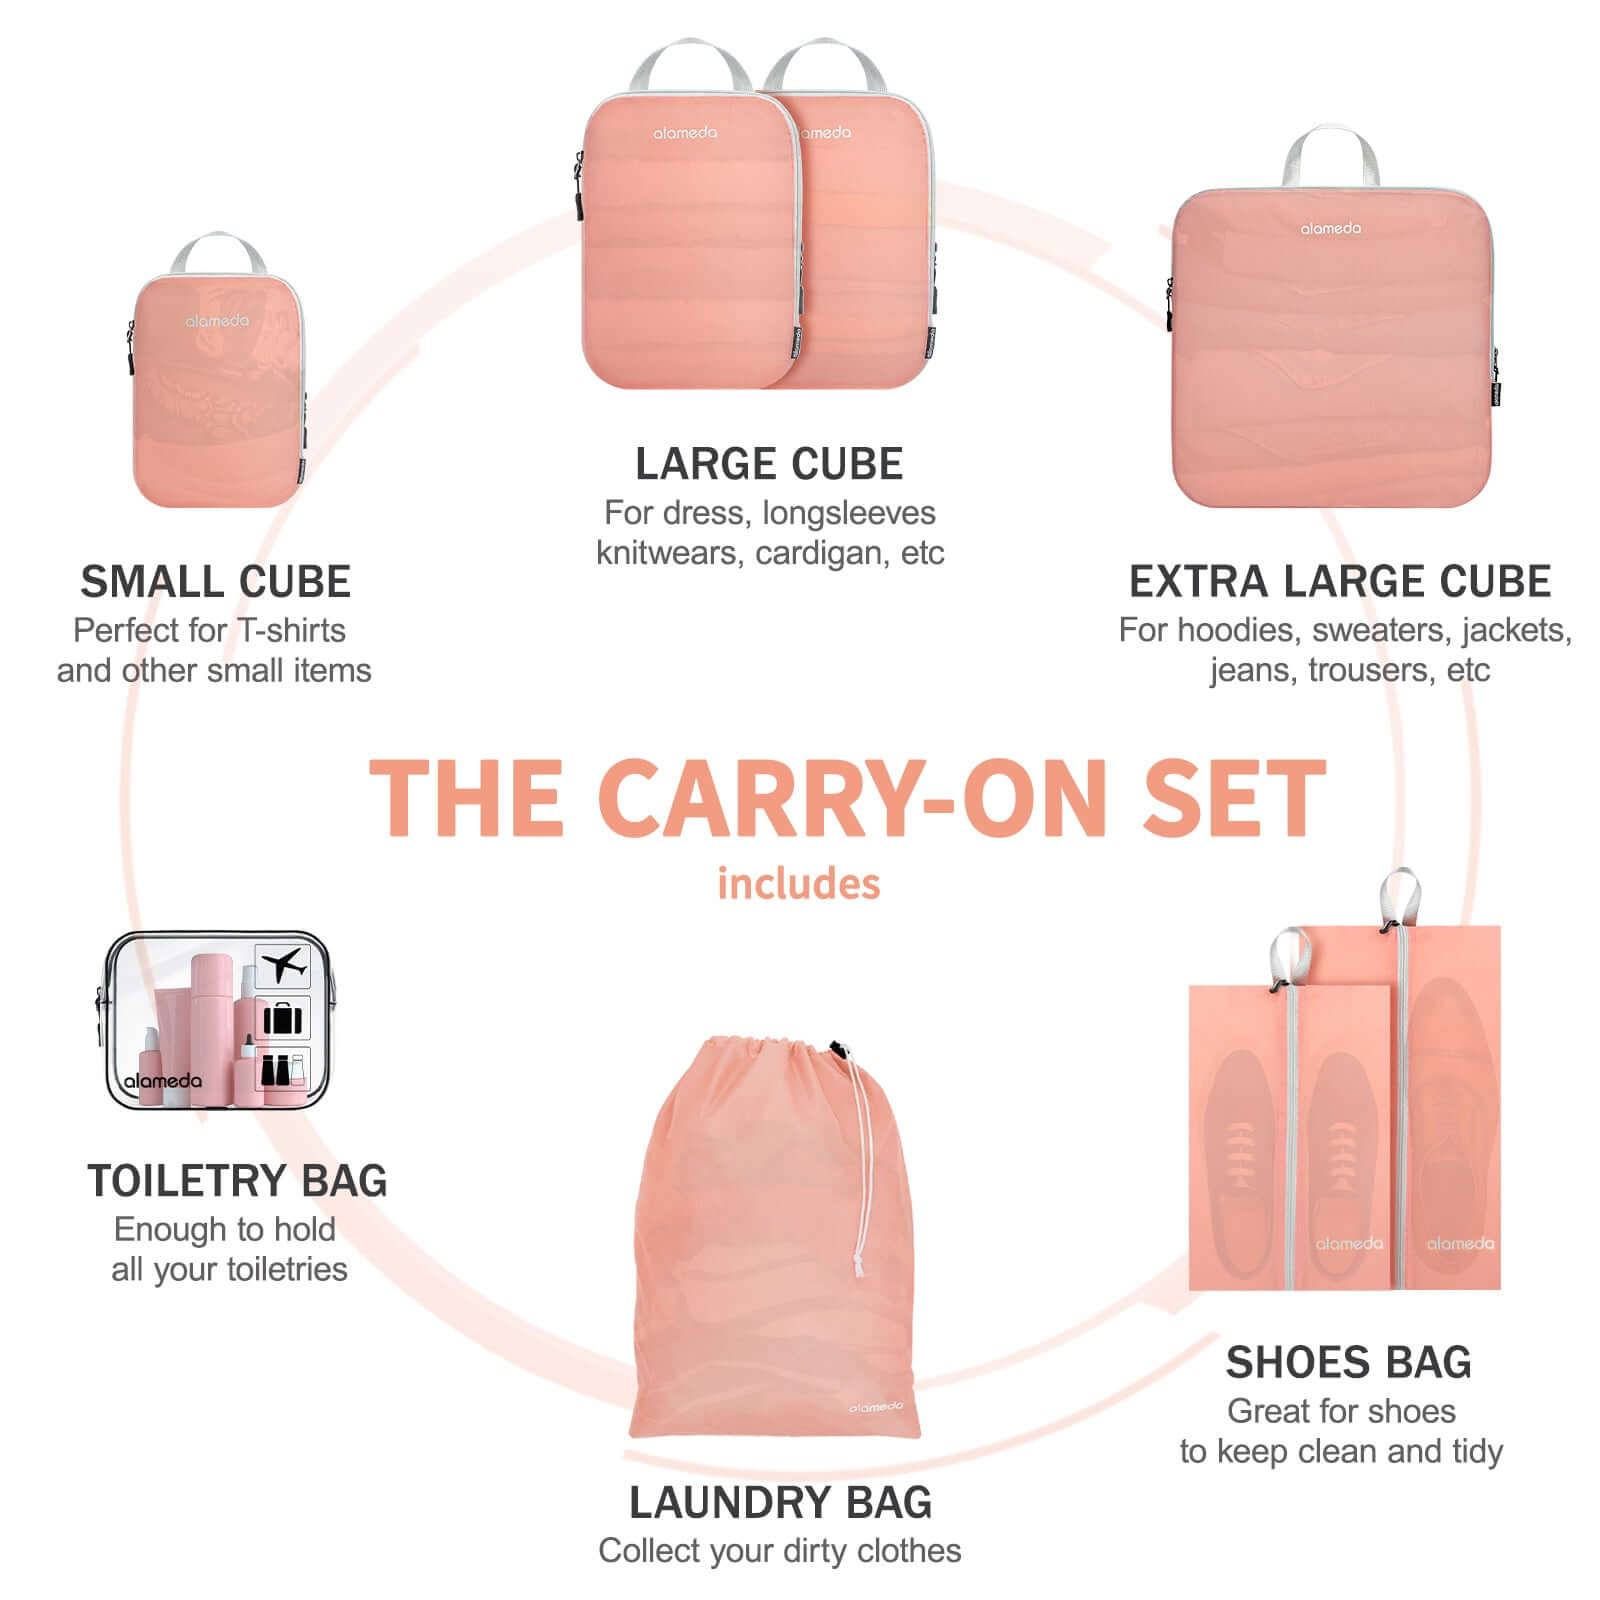  Extra Large Compression Packing Cubes for Travel-Extra